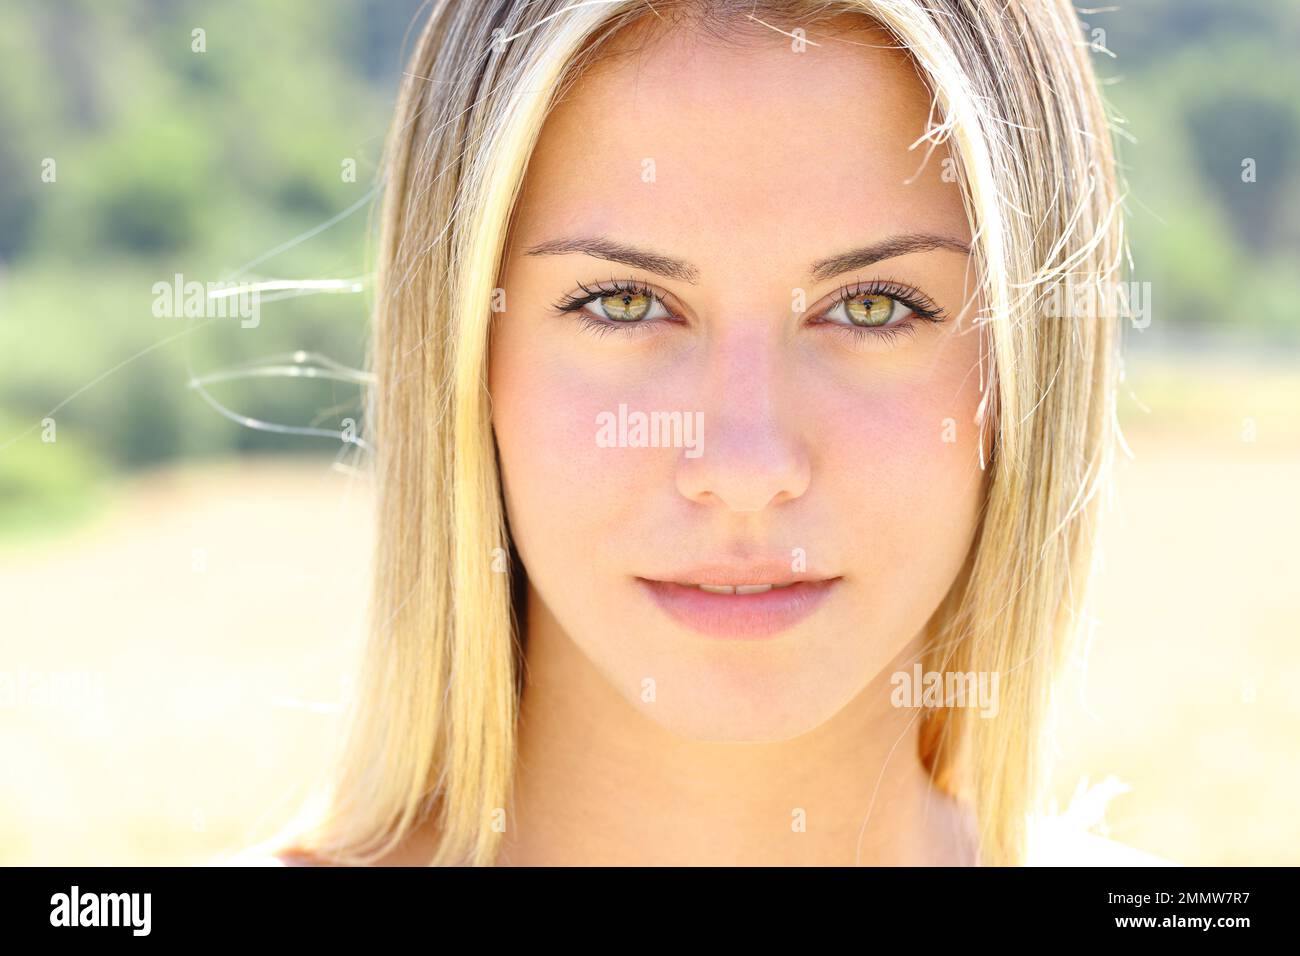 Front view portrait of a beautiful woman with green eyes looks at camera Stock Photo